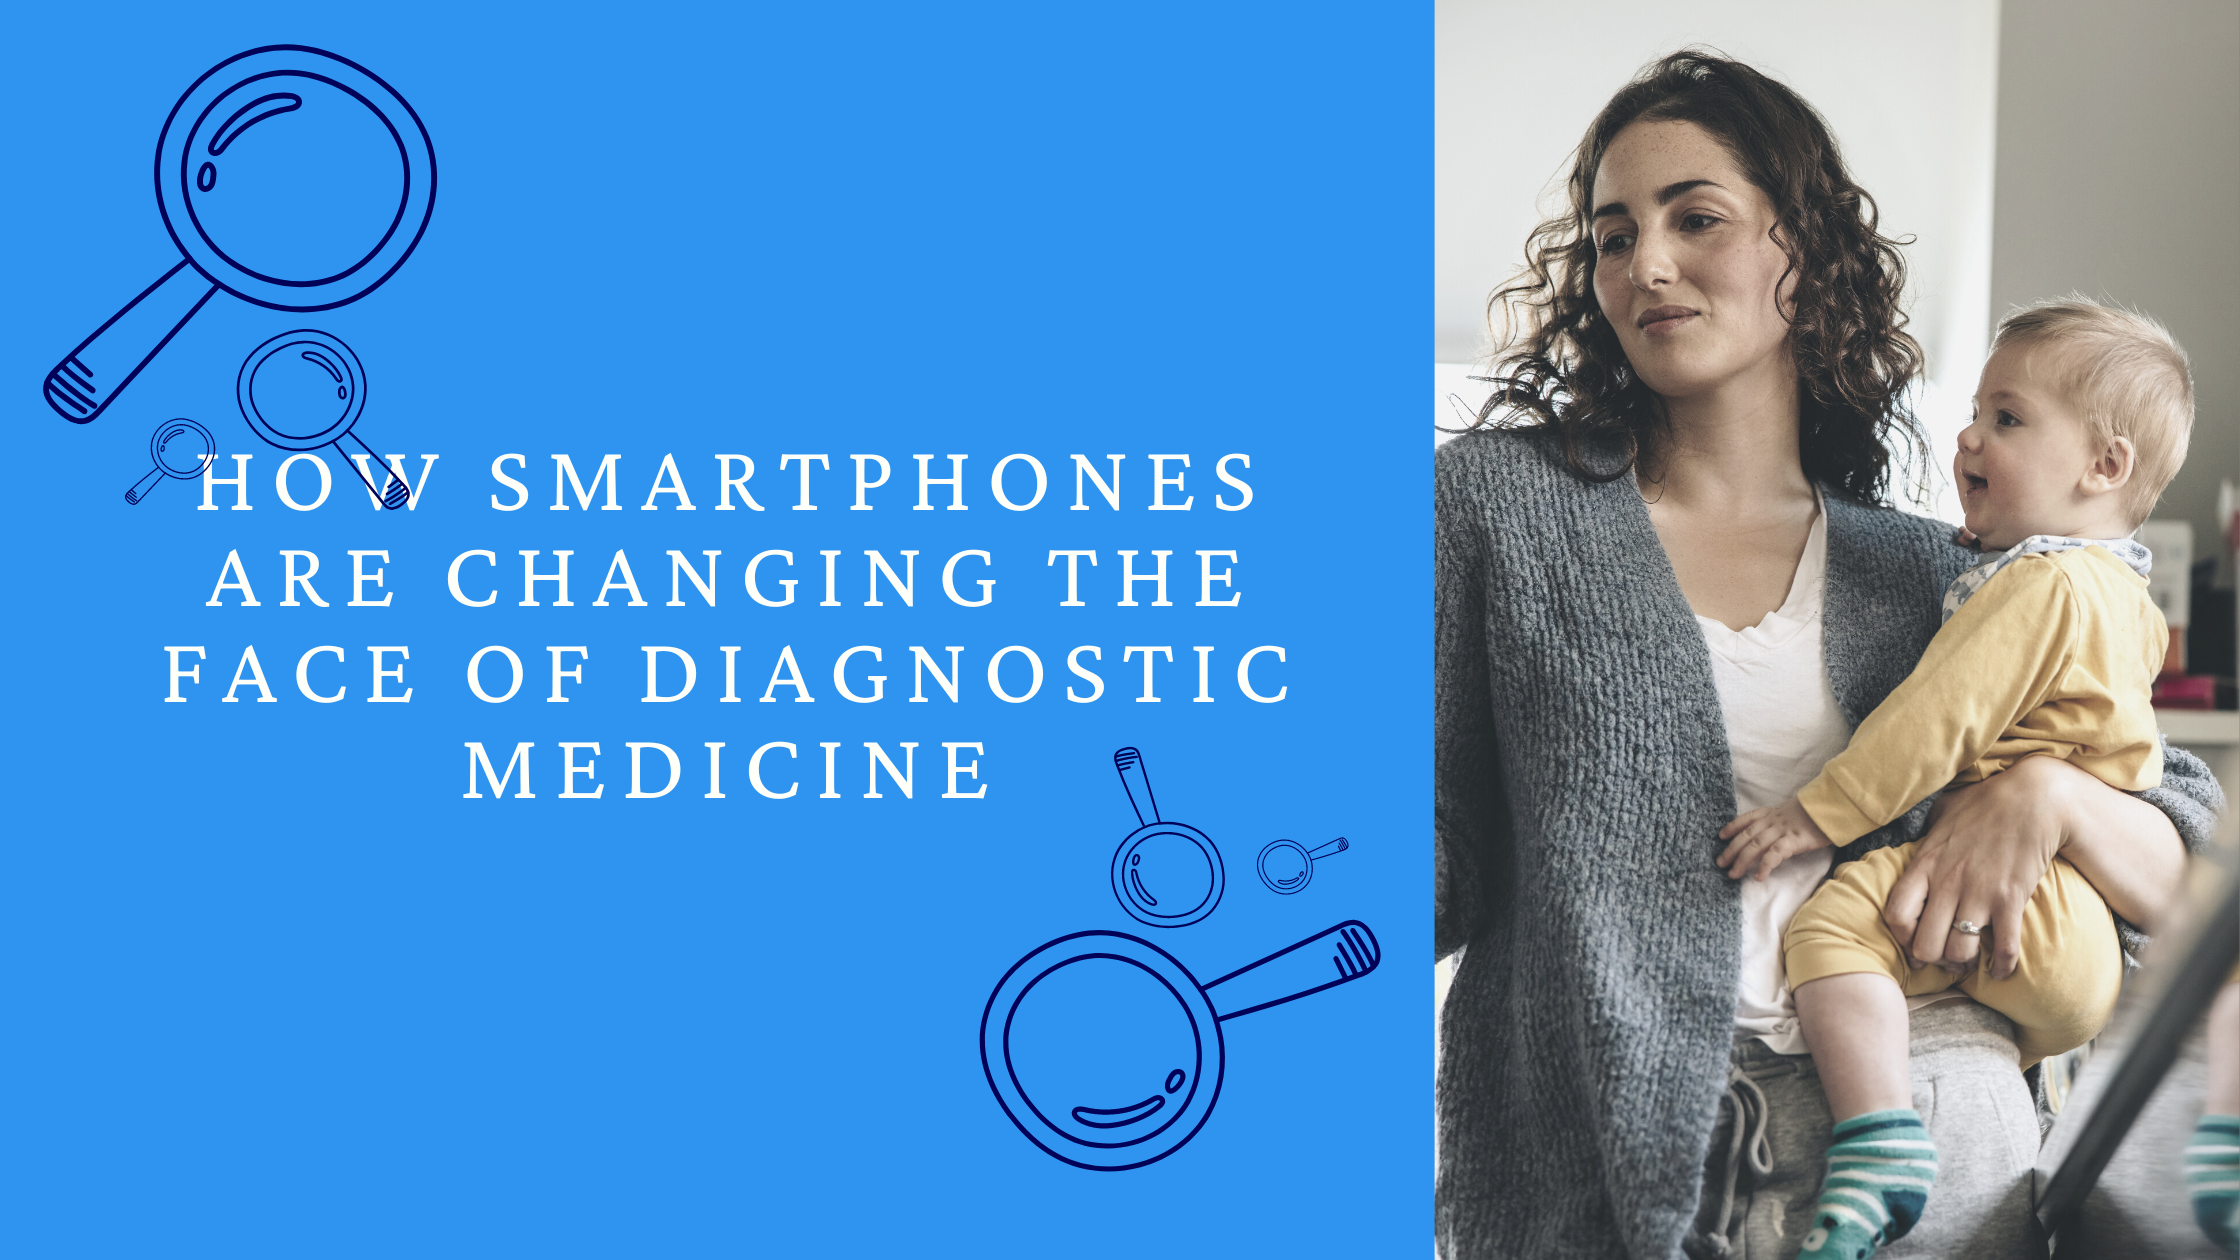 How Smartphones are changing the face of diagnostic medicine